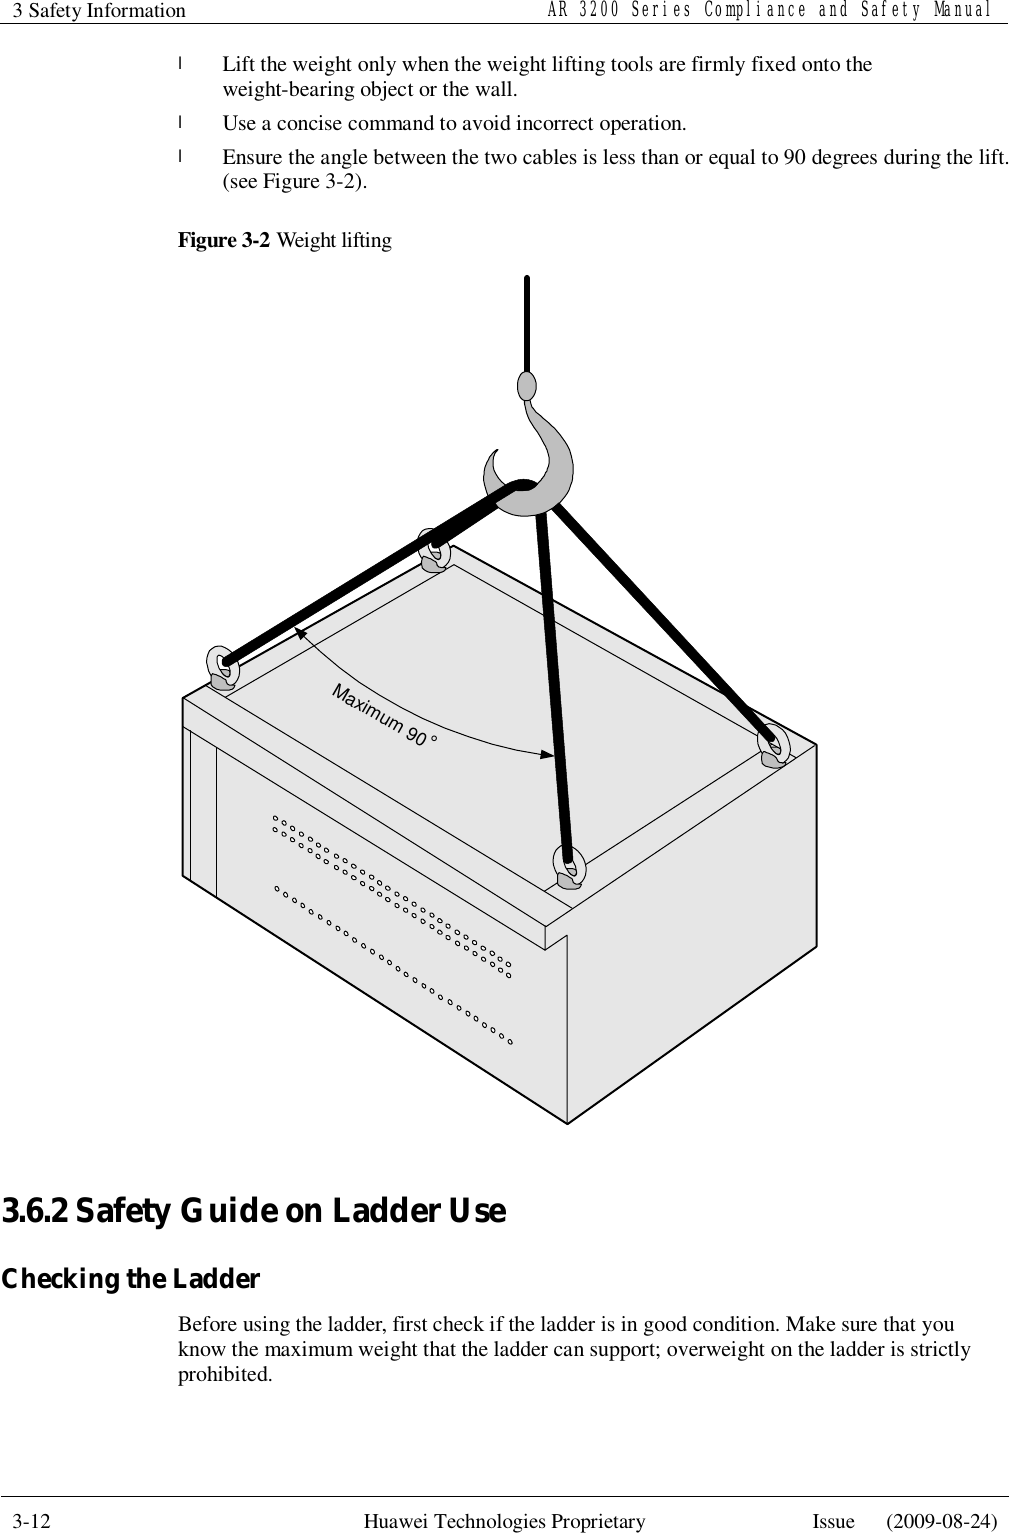 3 Safety Information   AR 3200 Series Compliance and Safety Manual  3-12  Huawei Technologies Proprietary  Issue   (2009-08-24)  l Lift the weight only when the weight lifting tools are firmly fixed onto the weight-bearing object or the wall. l Use a concise command to avoid incorrect operation. l Ensure the angle between the two cables is less than or equal to 90 degrees during the lift. (see Figure 3-2). Figure 3-2 Weight lifting Maximum 90°  3.6.2 Safety Guide on Ladder Use Checking the Ladder Before using the ladder, first check if the ladder is in good condition. Make sure that you know the maximum weight that the ladder can support; overweight on the ladder is strictly prohibited. 